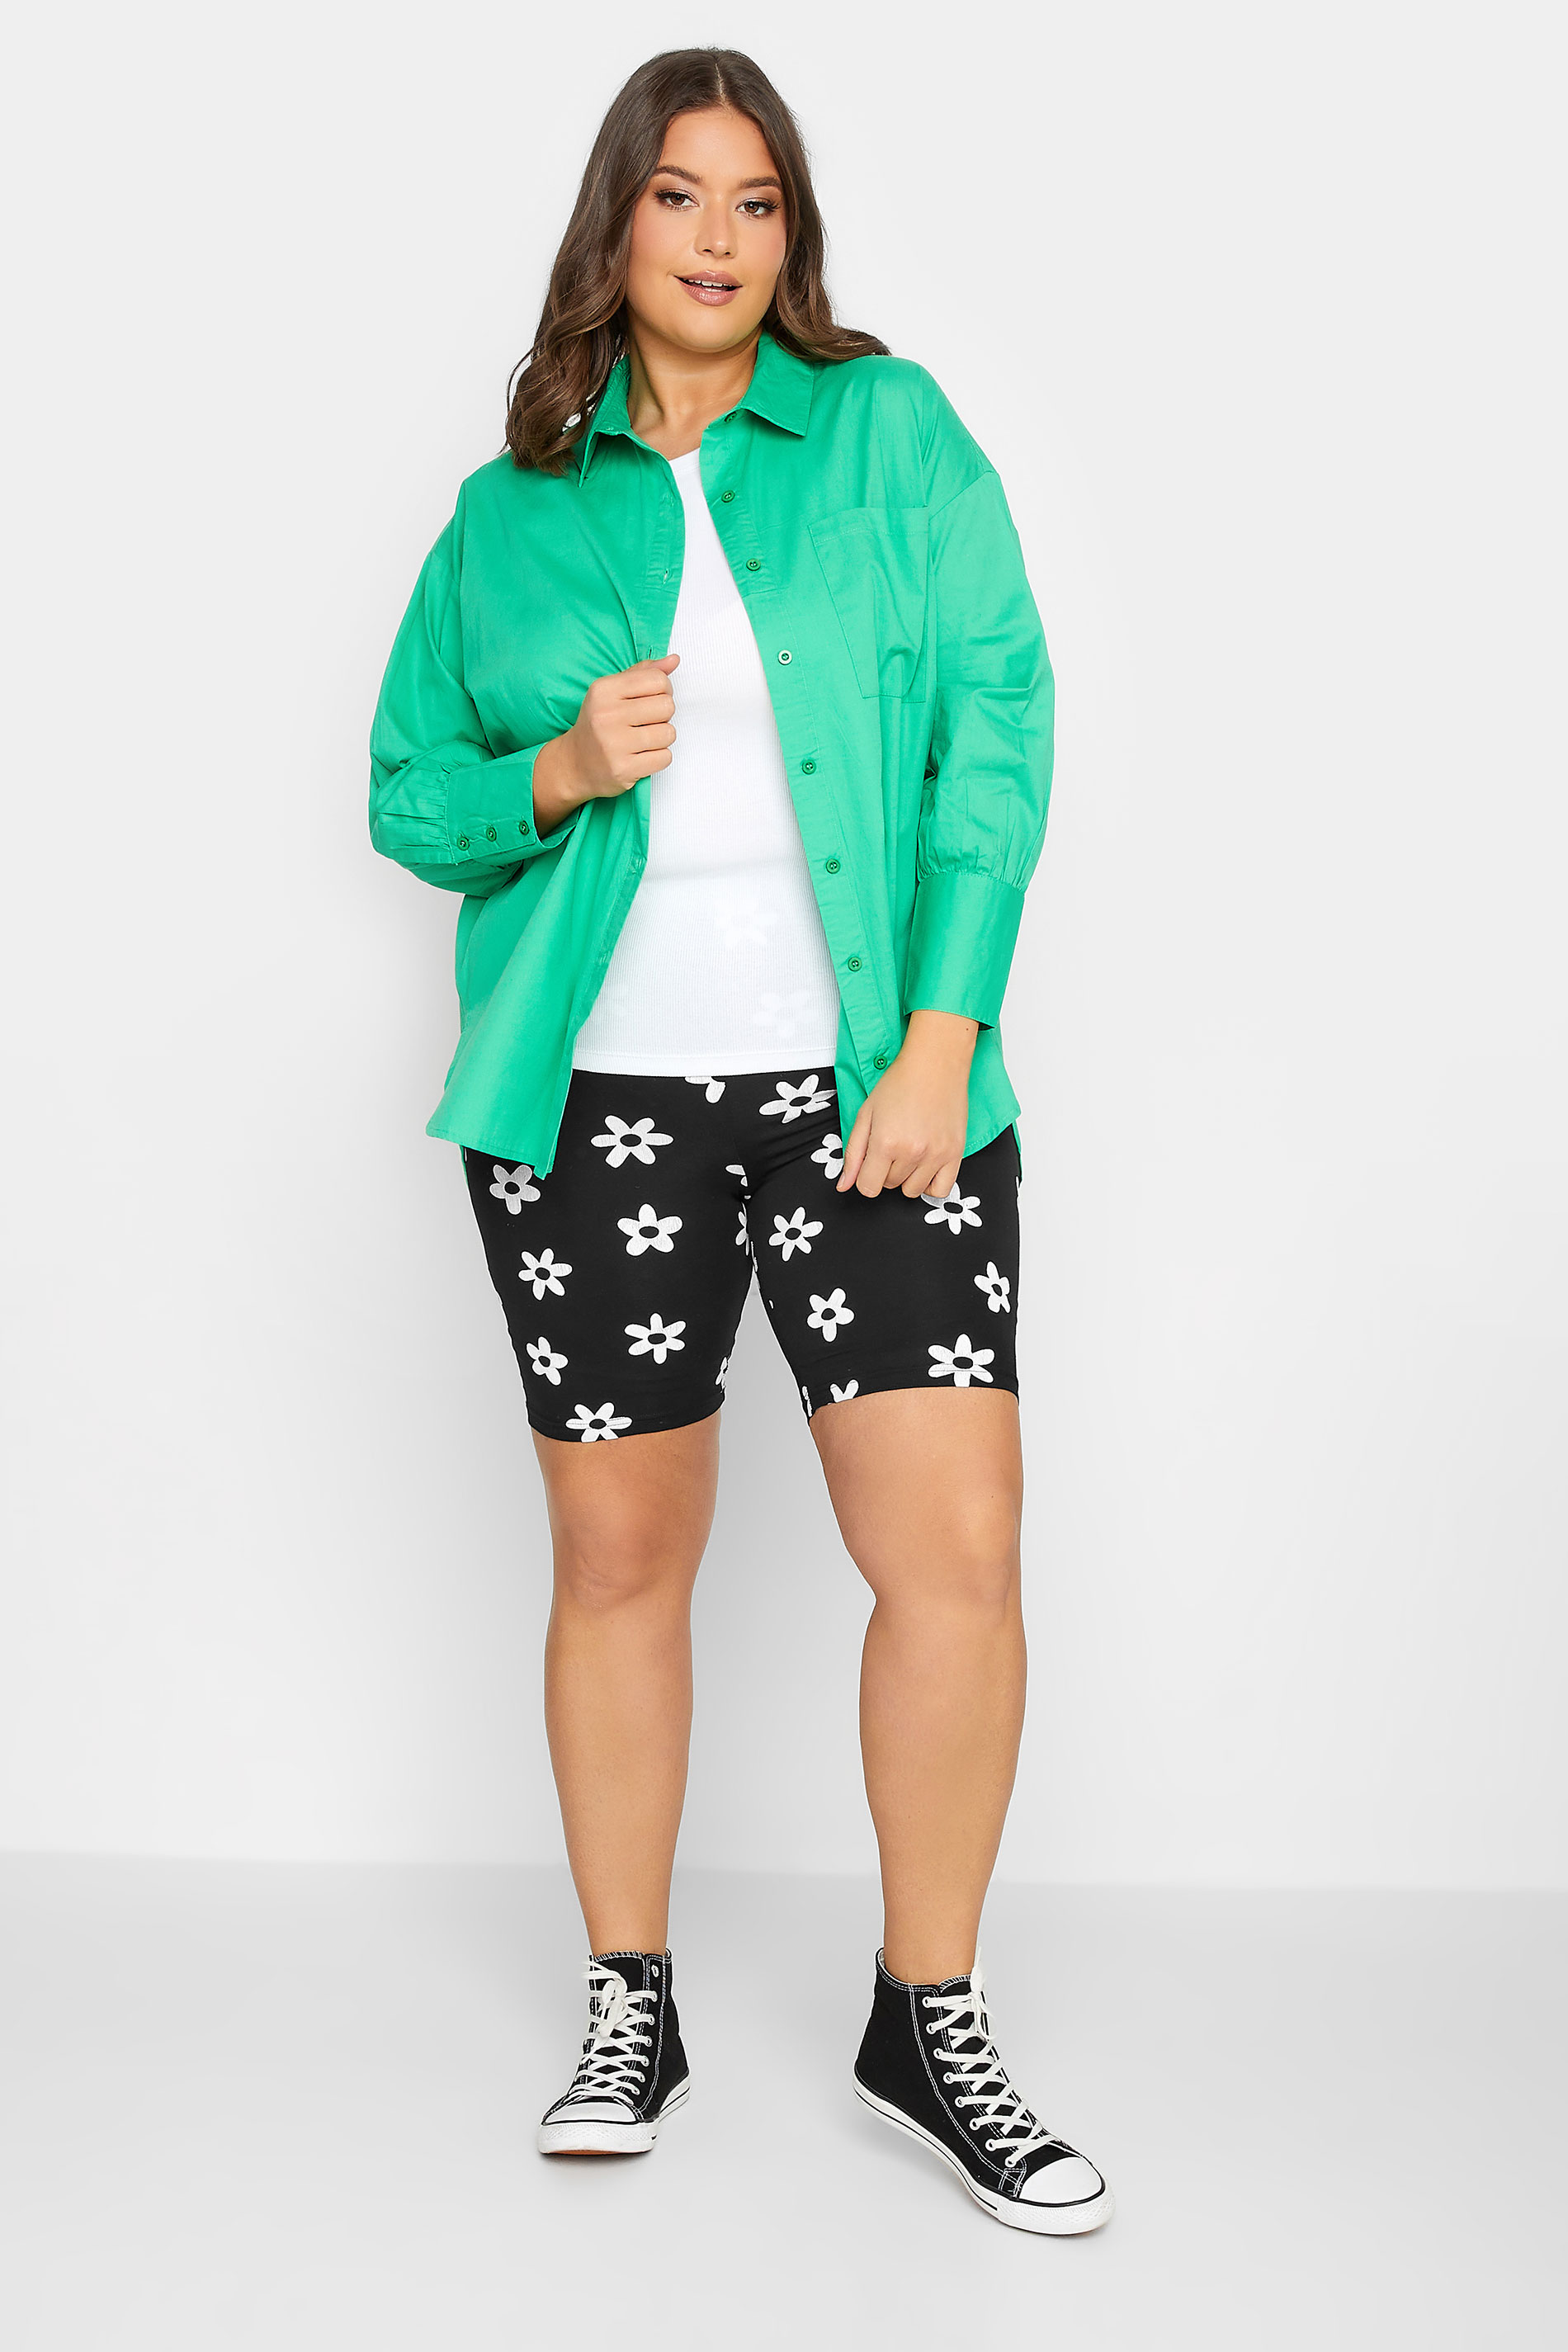 YOURS Curve Plus Size 2 PACK Black Floral Cycling Shorts | Yours Clothing  3